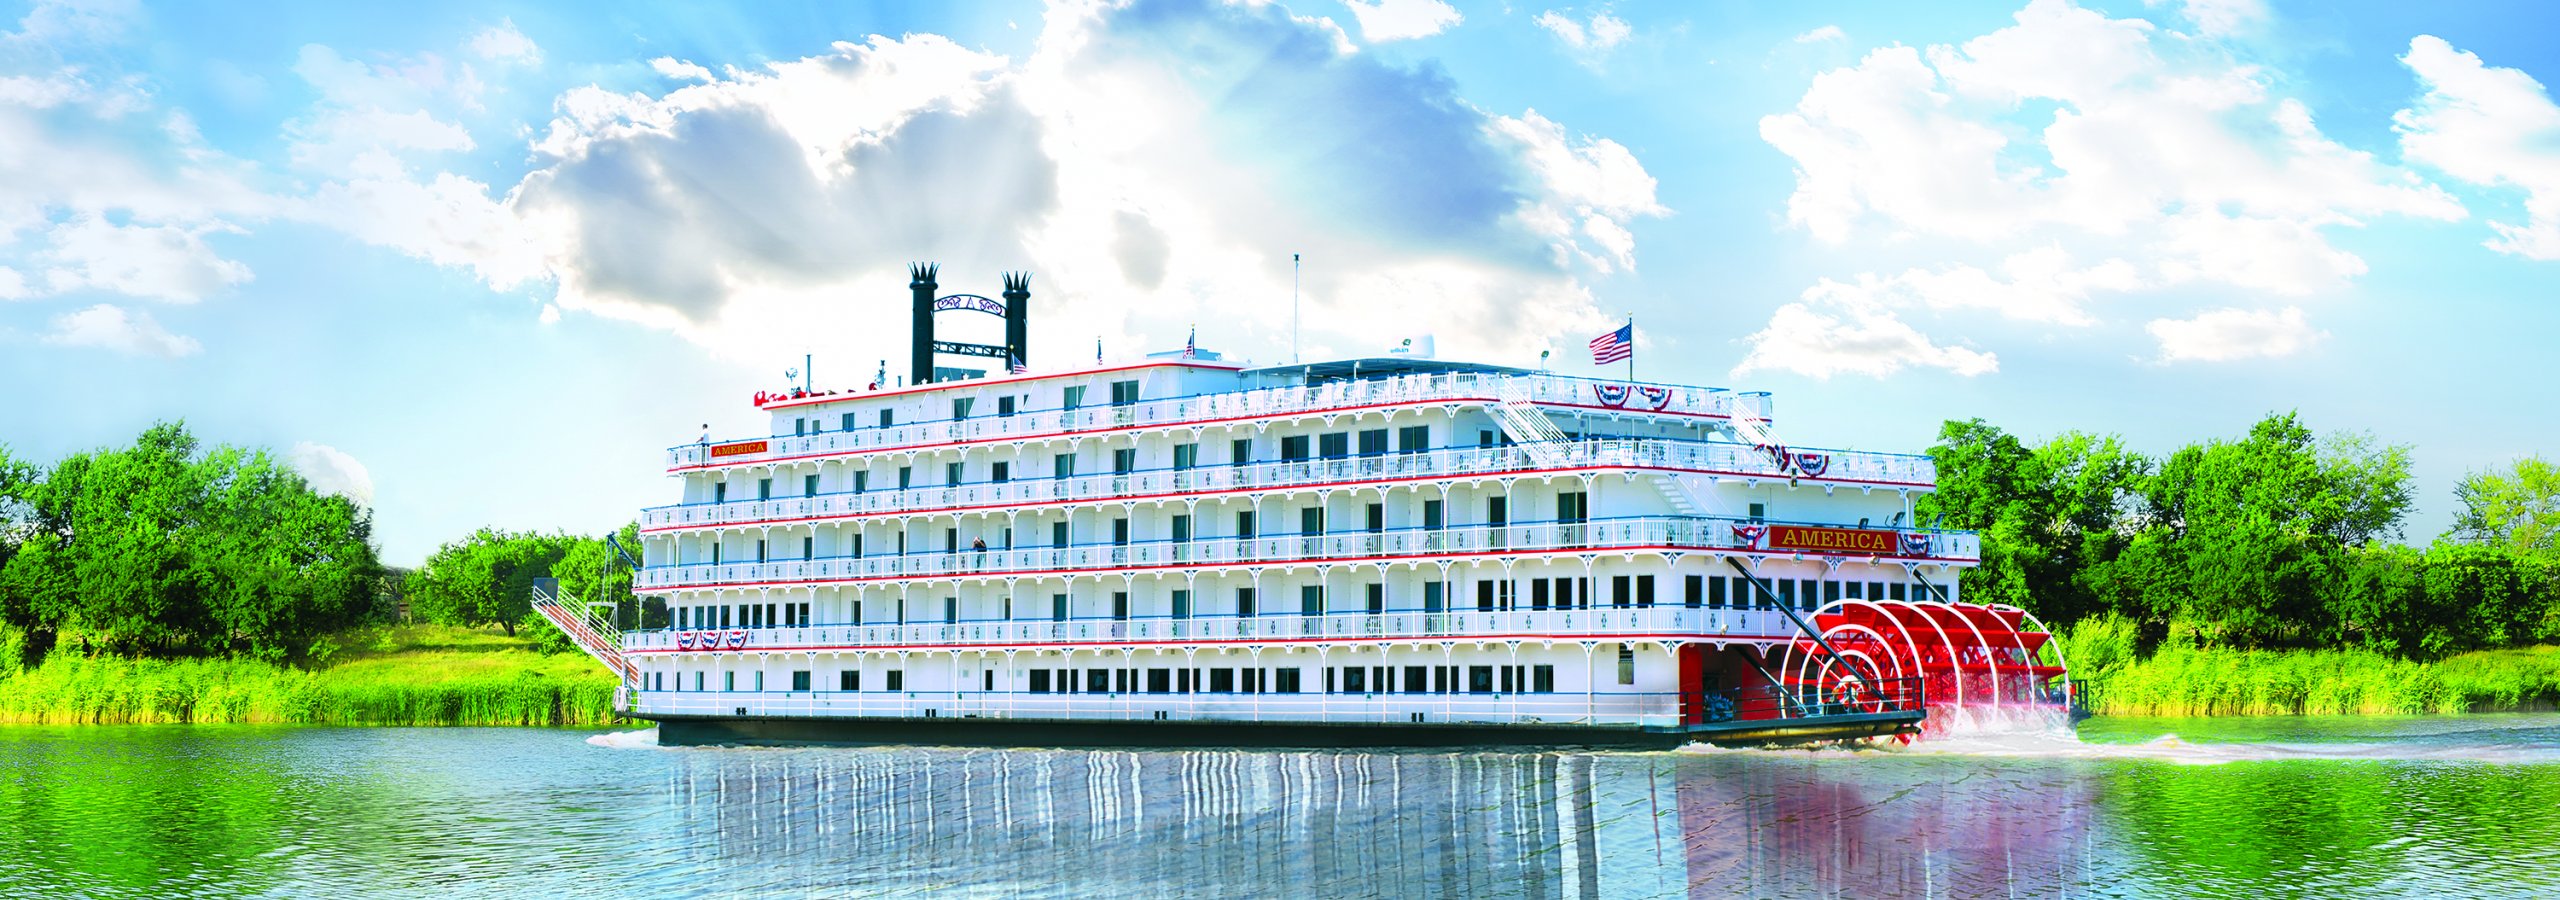 Show Boat on the Mississippi, with New York